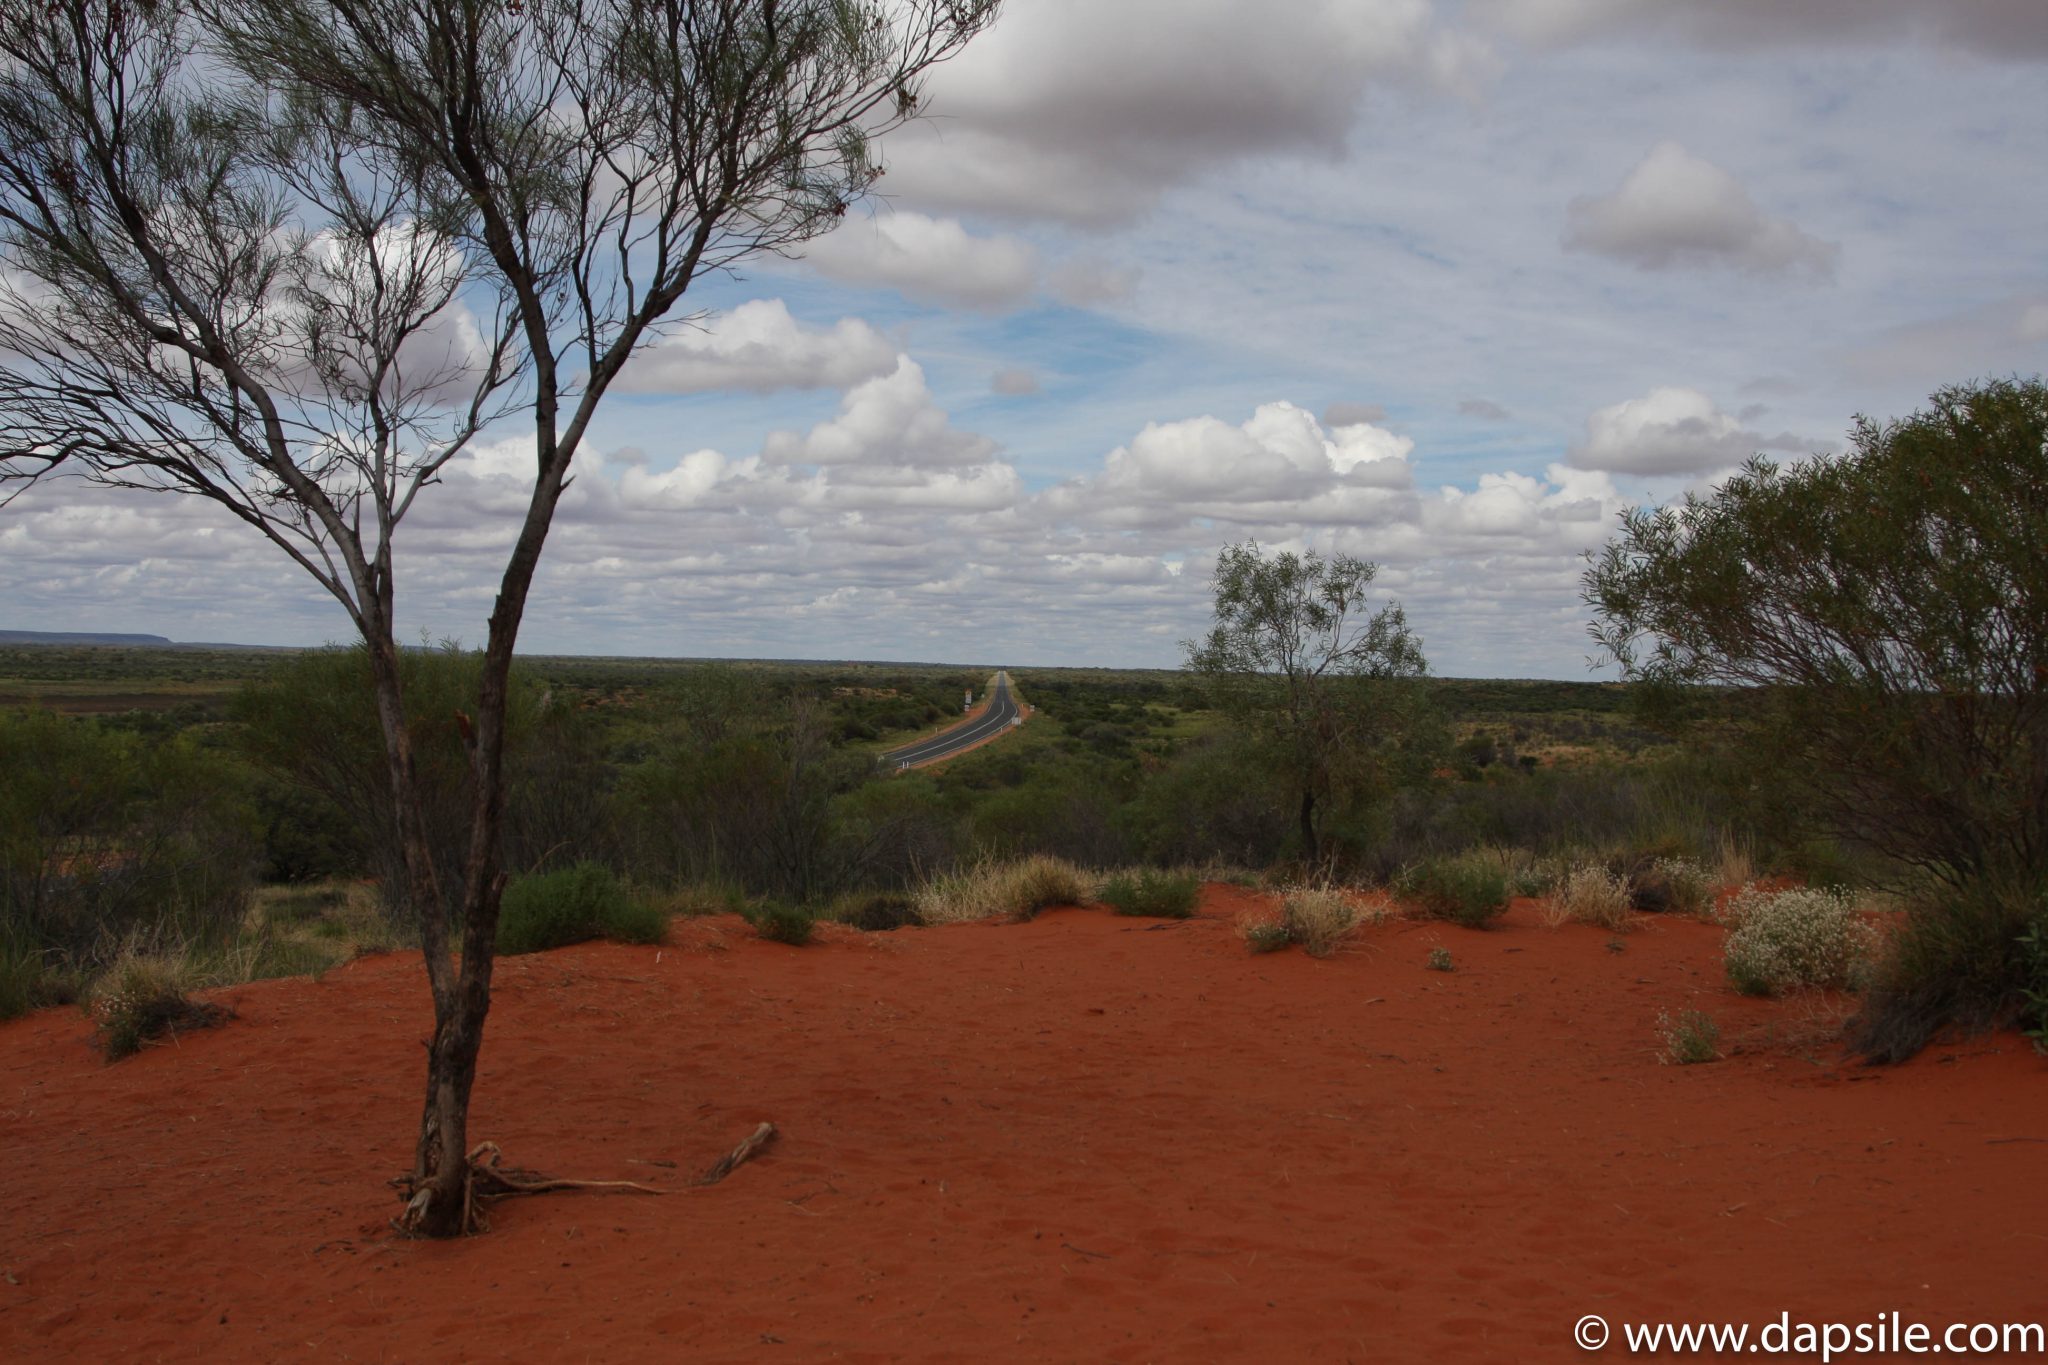 A Road in the Red Outback when visiting the Alice Springs area